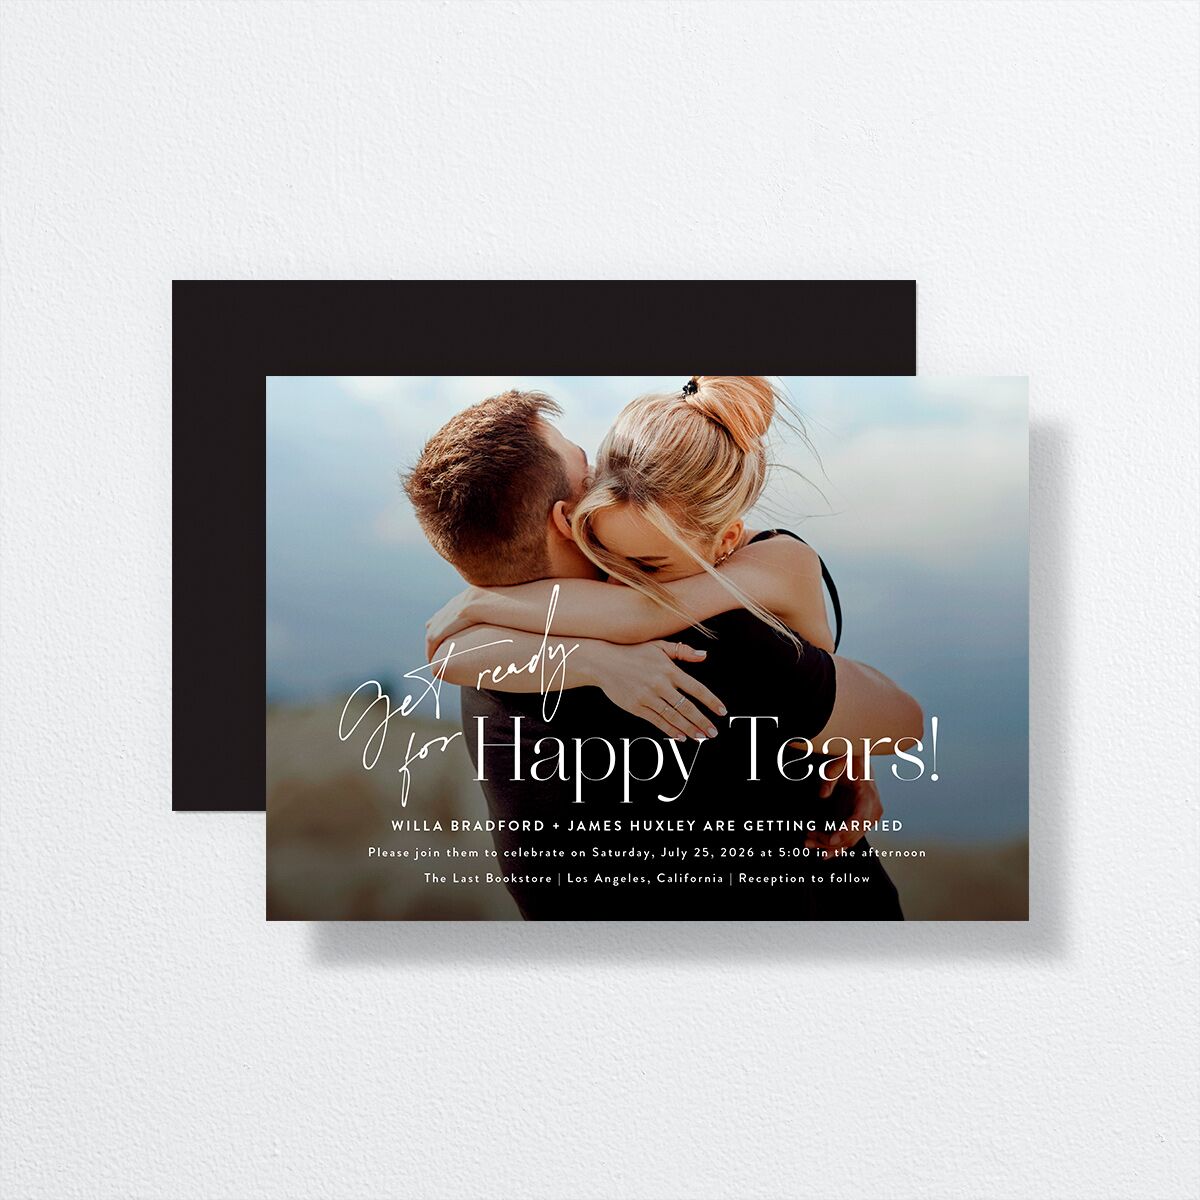 Happy Tears Wedding Invitations  front-and-back